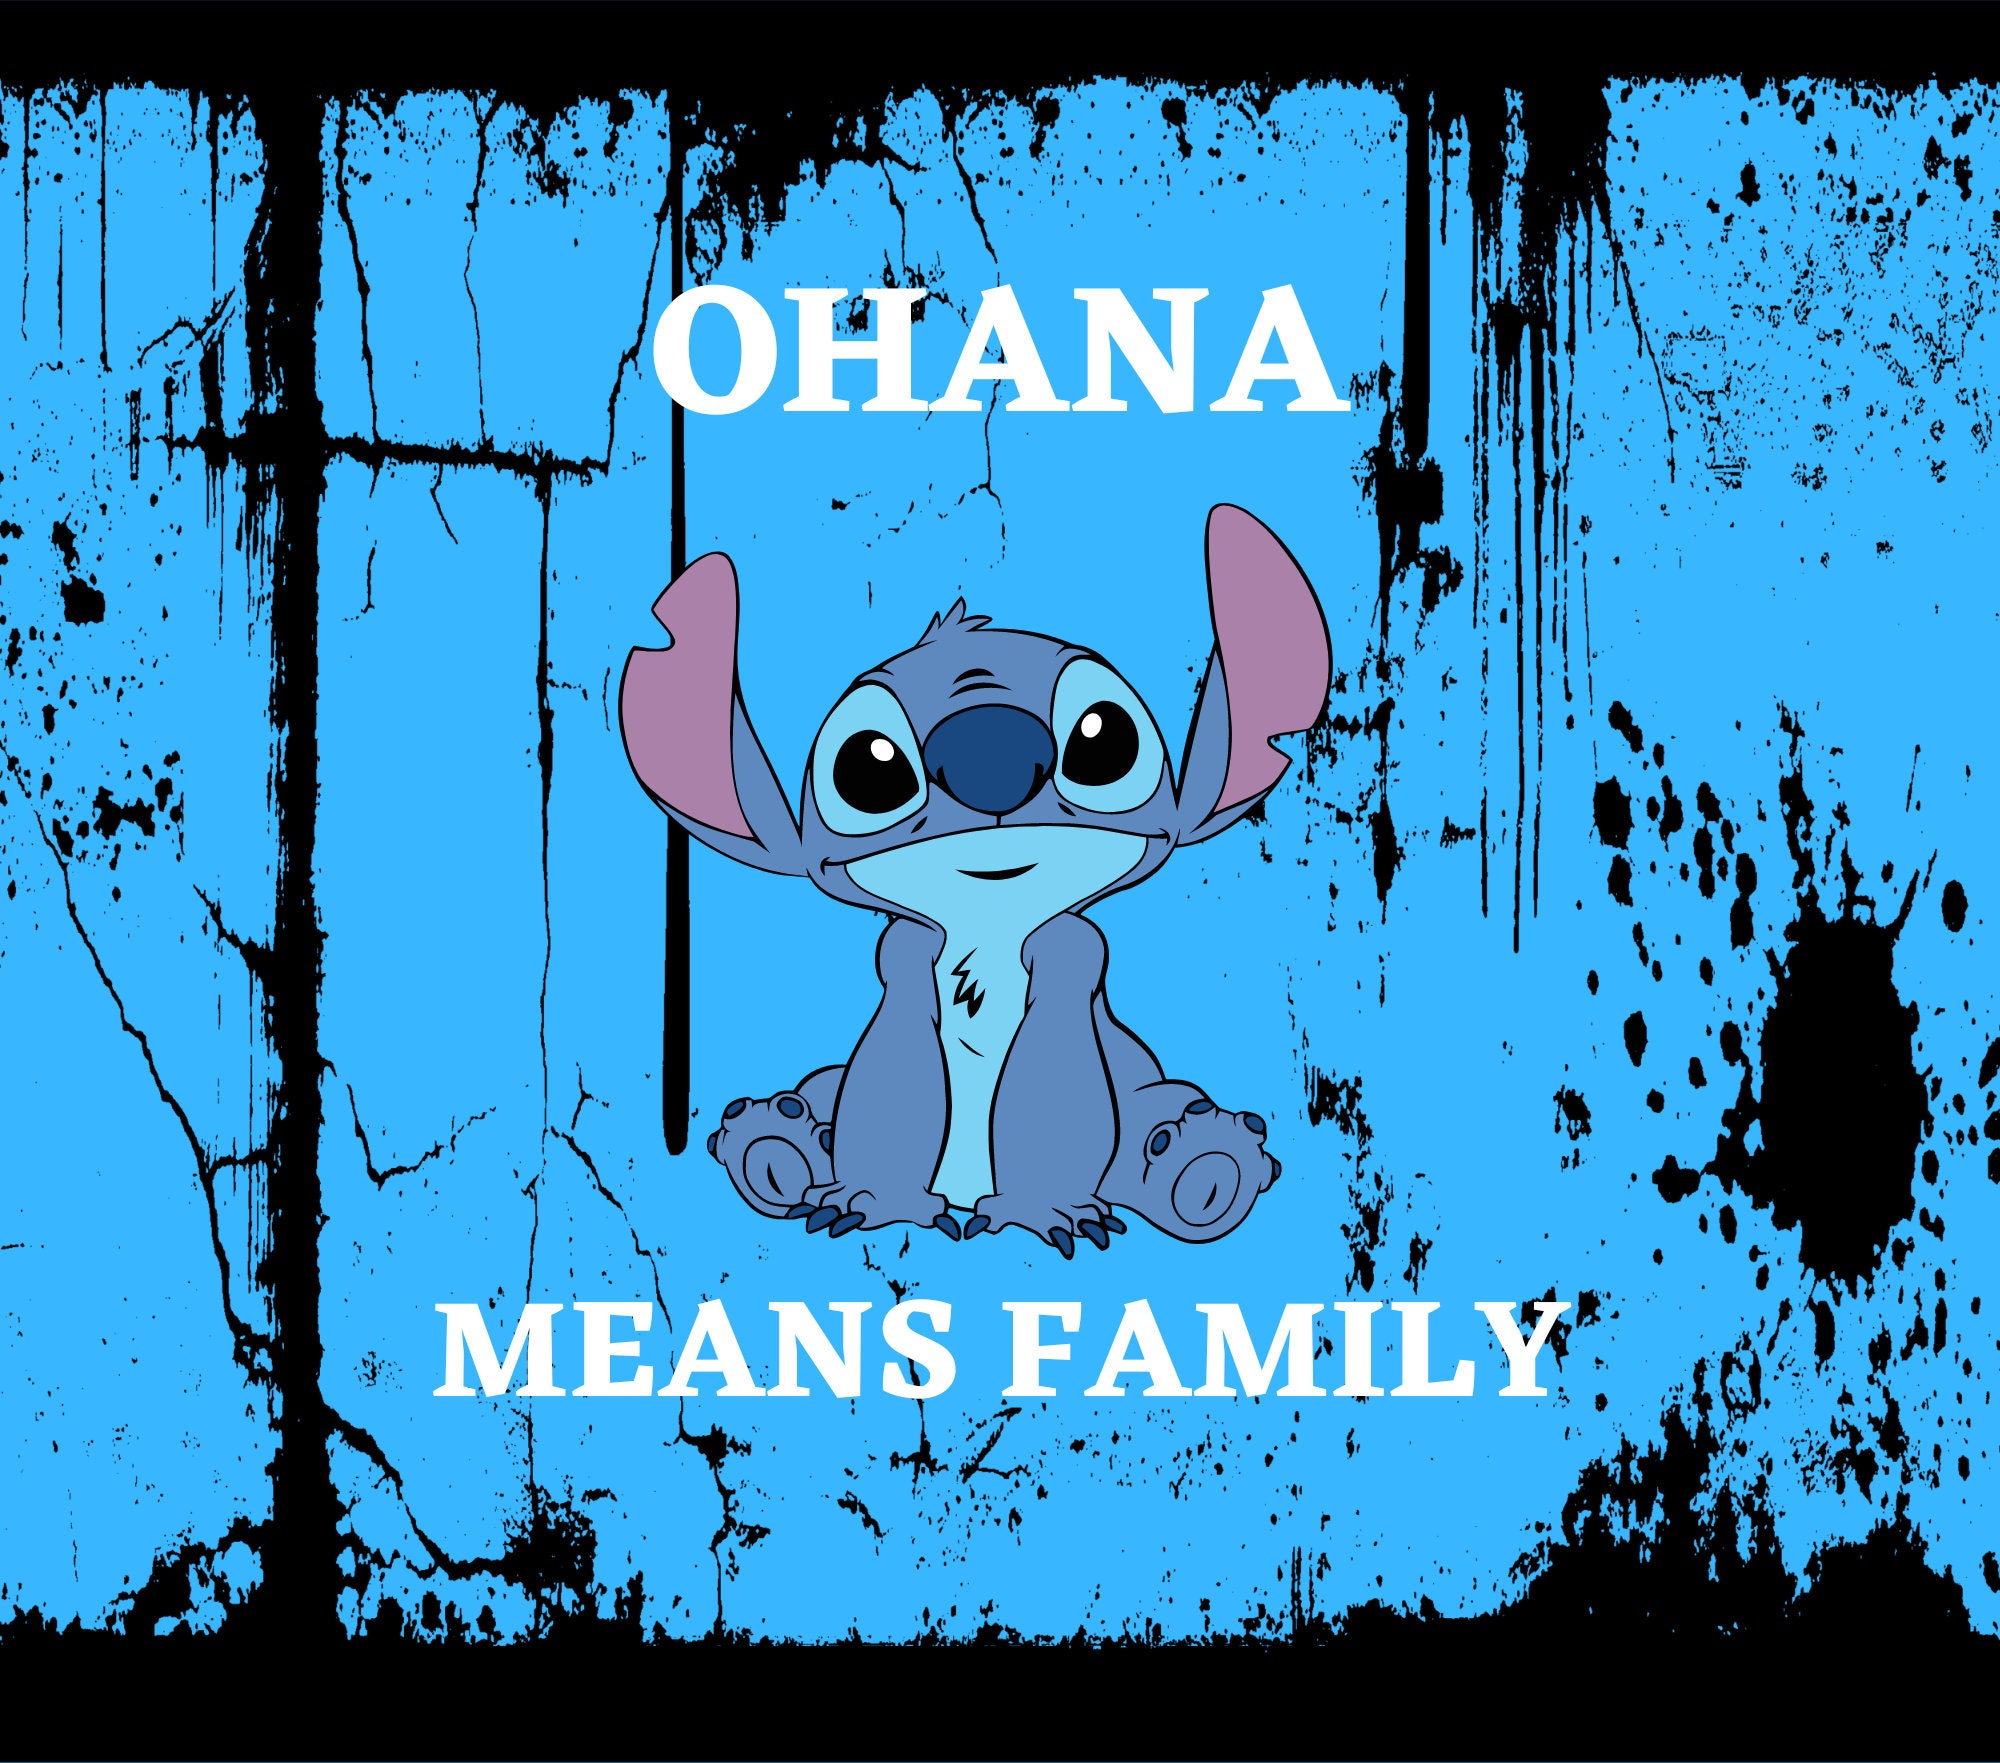 Lilo & Stitch Wall Art - Set of 3 (8 Inches x 10 inches) Ohana Means Family Poster Prints Coachella Watercolor Quote, Nursery